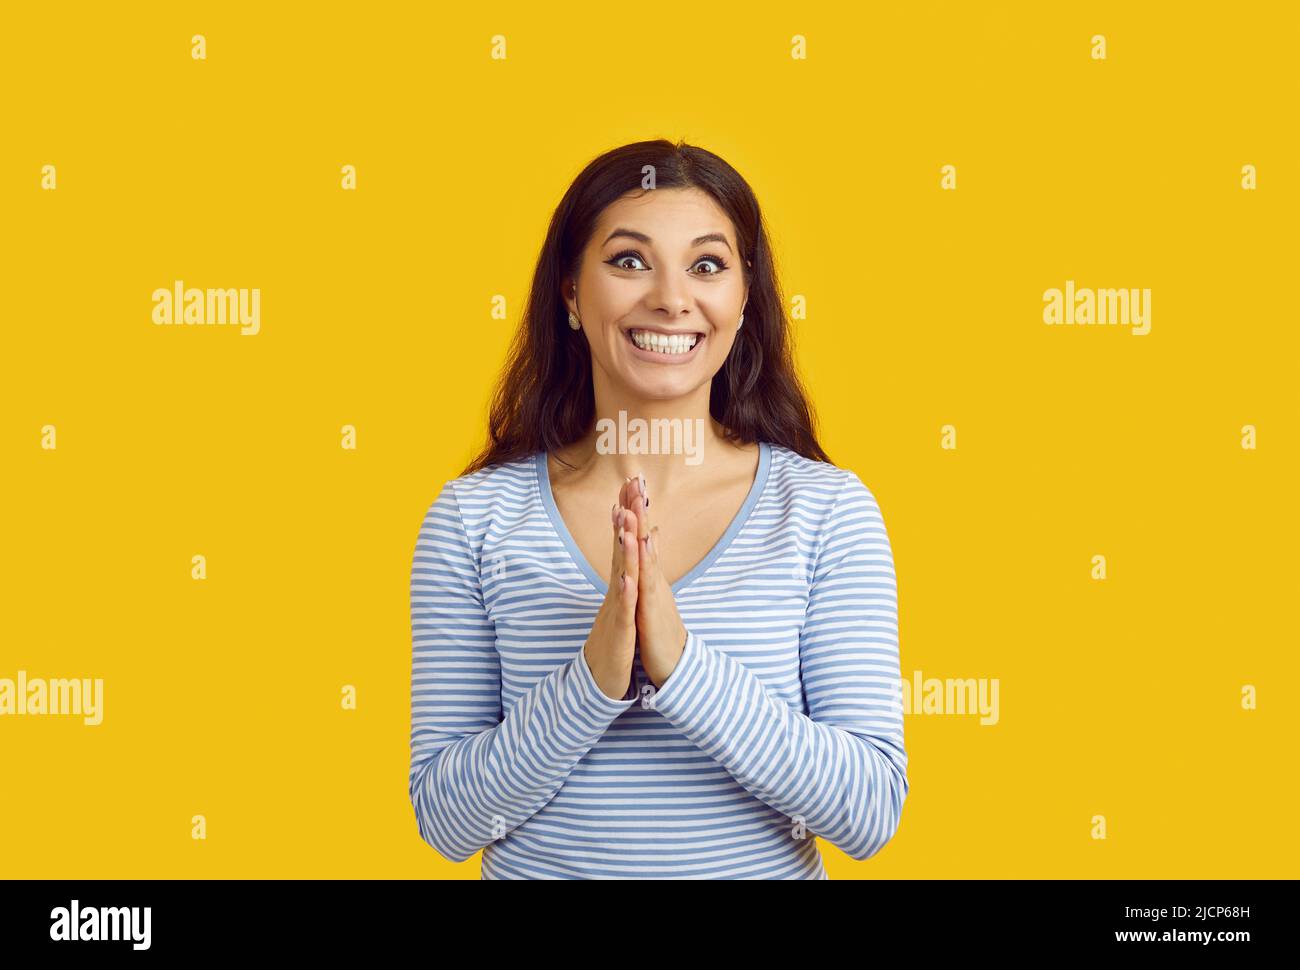 Happy excited woman waiting for surprise, smiling and rubbing hands in anticipation Stock Photo